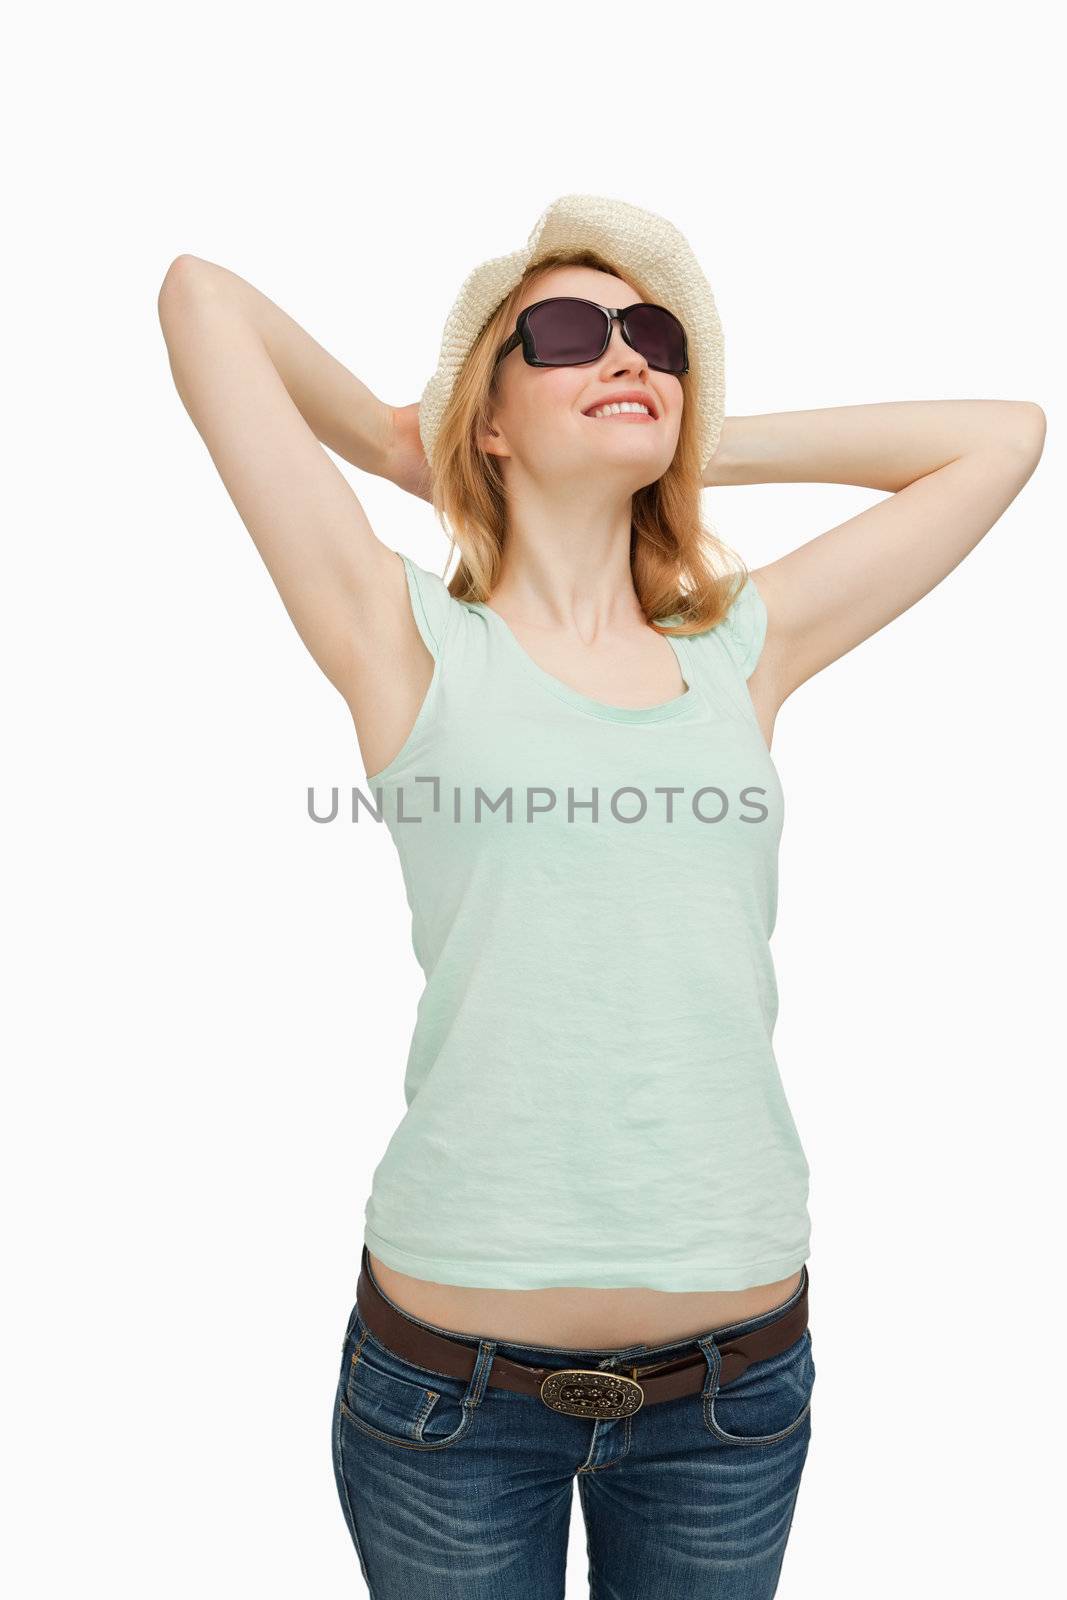 Woman smiling while wearing a summer hat by Wavebreakmedia